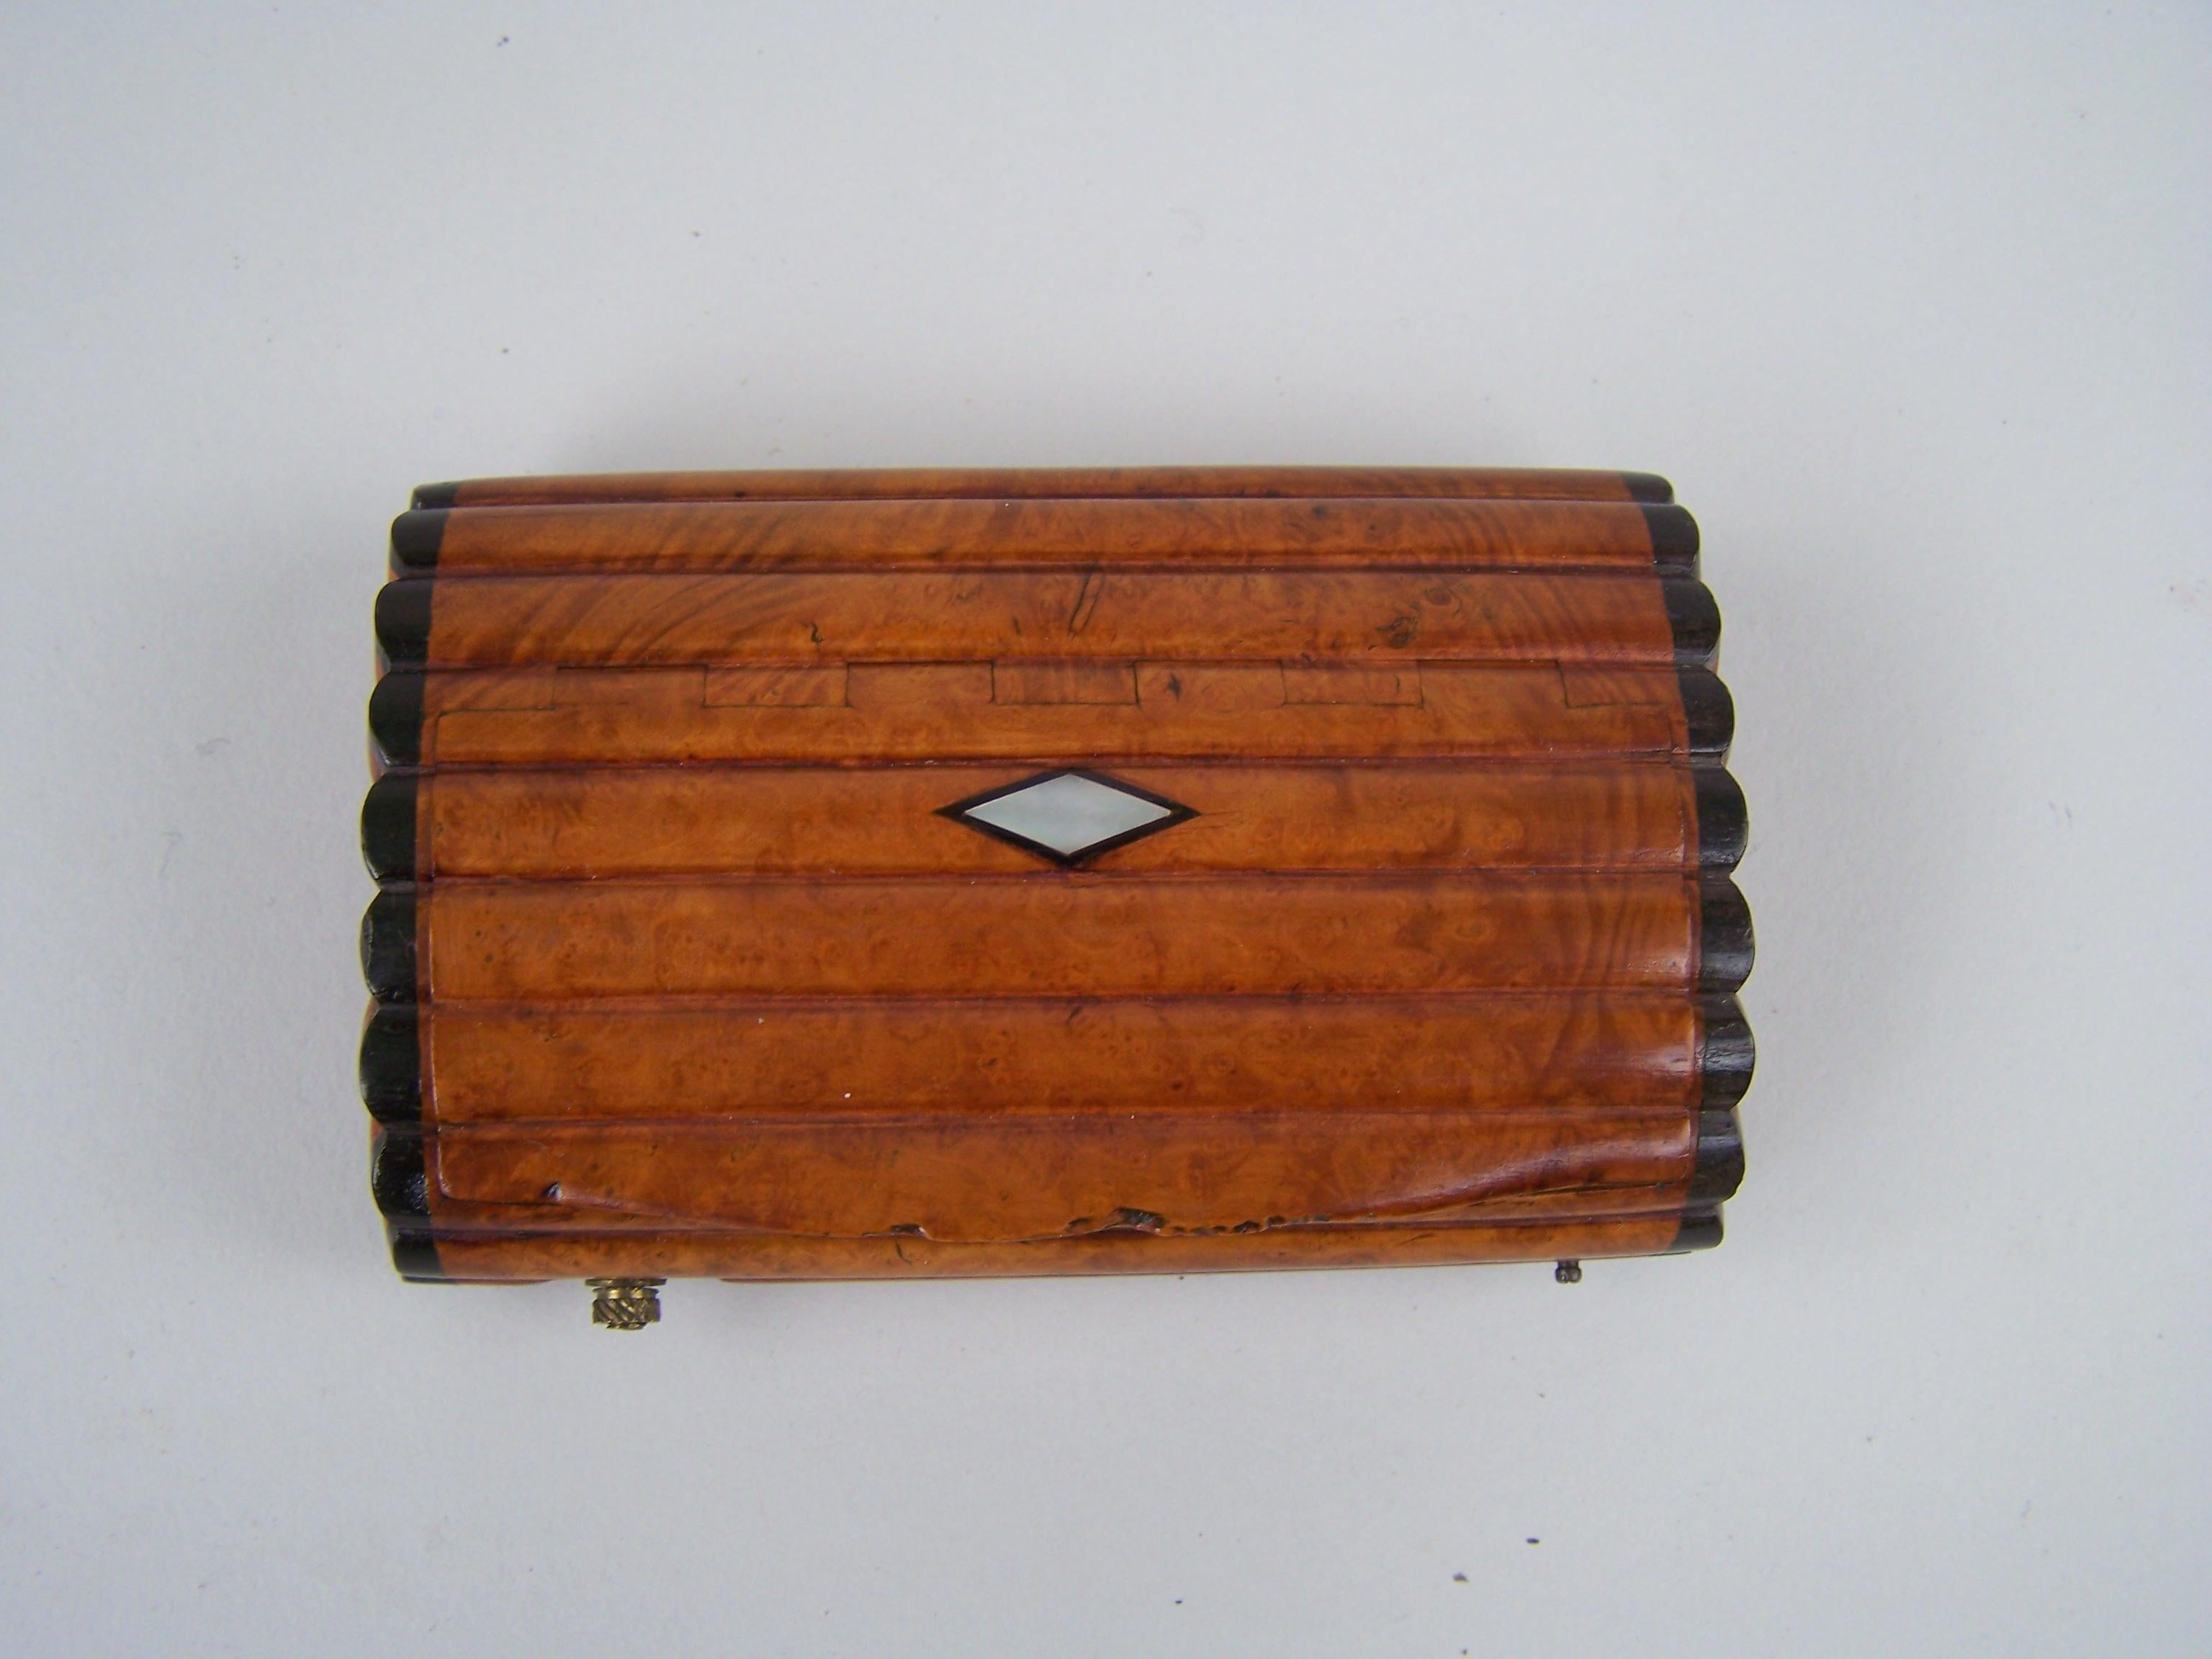 Snuffbox with music made in Switzerland in the first half of the 19th century.

This rare snuffbox plays 2 melodies, on a sectional comb. The comb is thus composed of several sections. This is typical of early boxes. It is only later, after 1840,